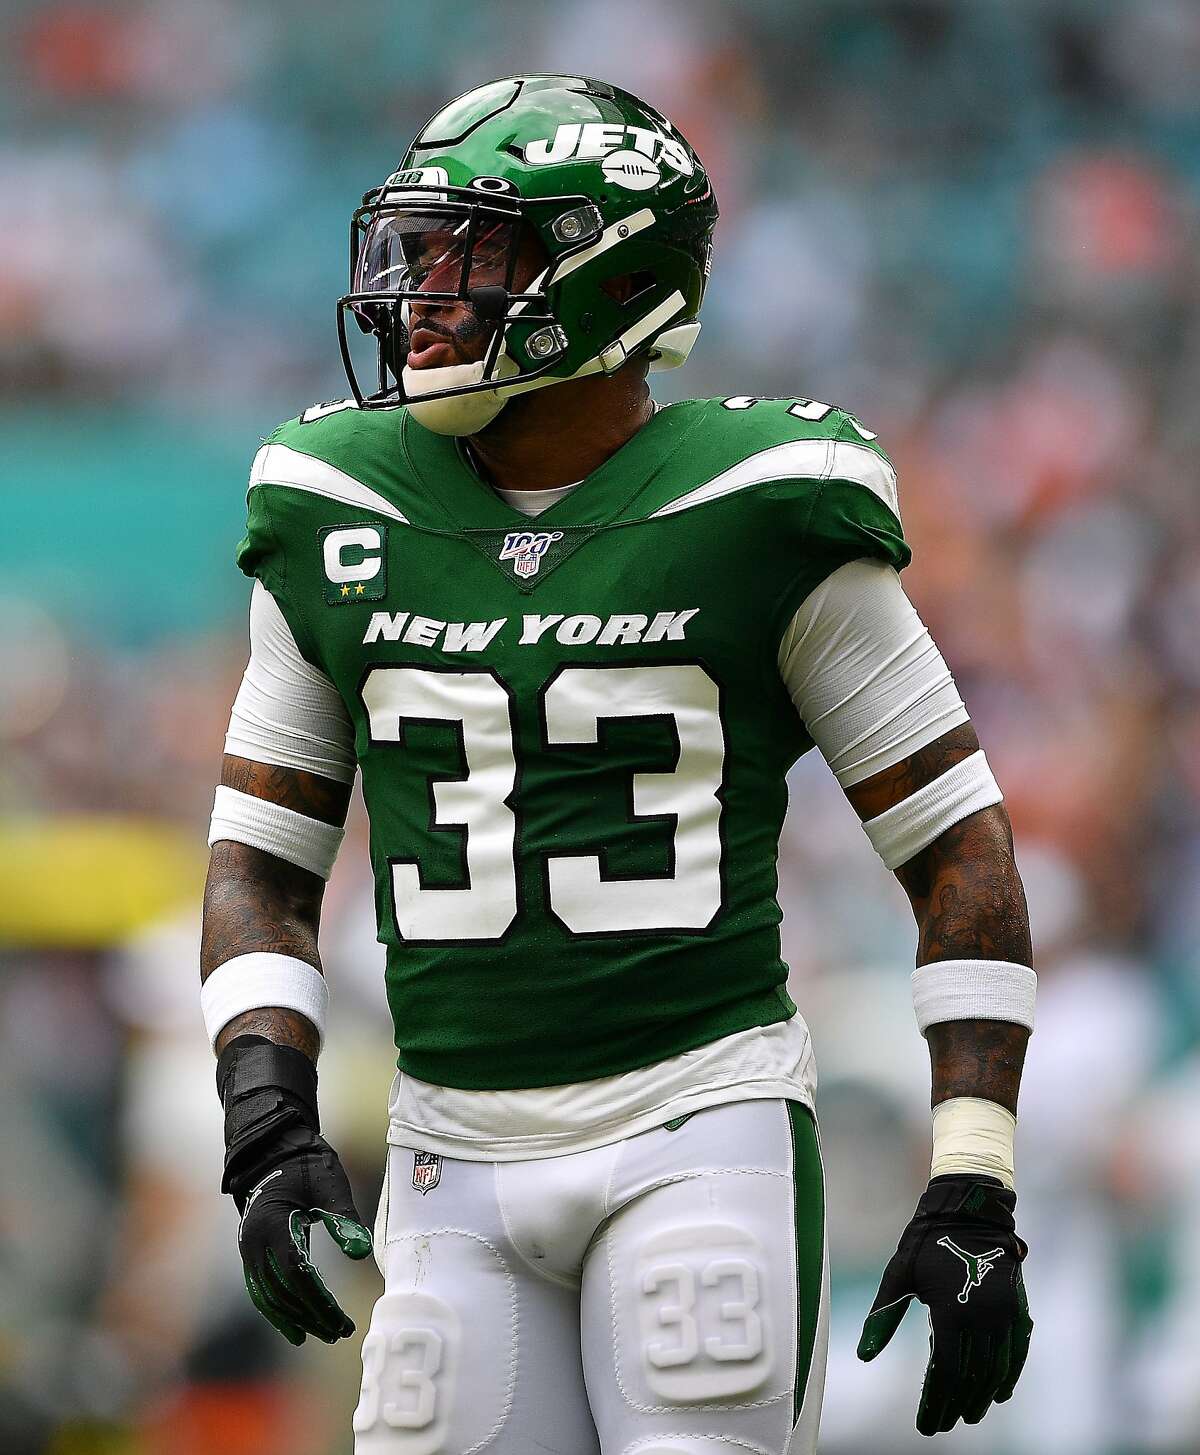 MIAMI, FLORIDA - NOVEMBER 03: Jamal Adams #33 of the New York Jets looks on during the gam against the Miami Dolphins in the first quarter at Hard Rock Stadium on November 03, 2019 in Miami, Florida. (Photo by Mark Brown/Getty Images)